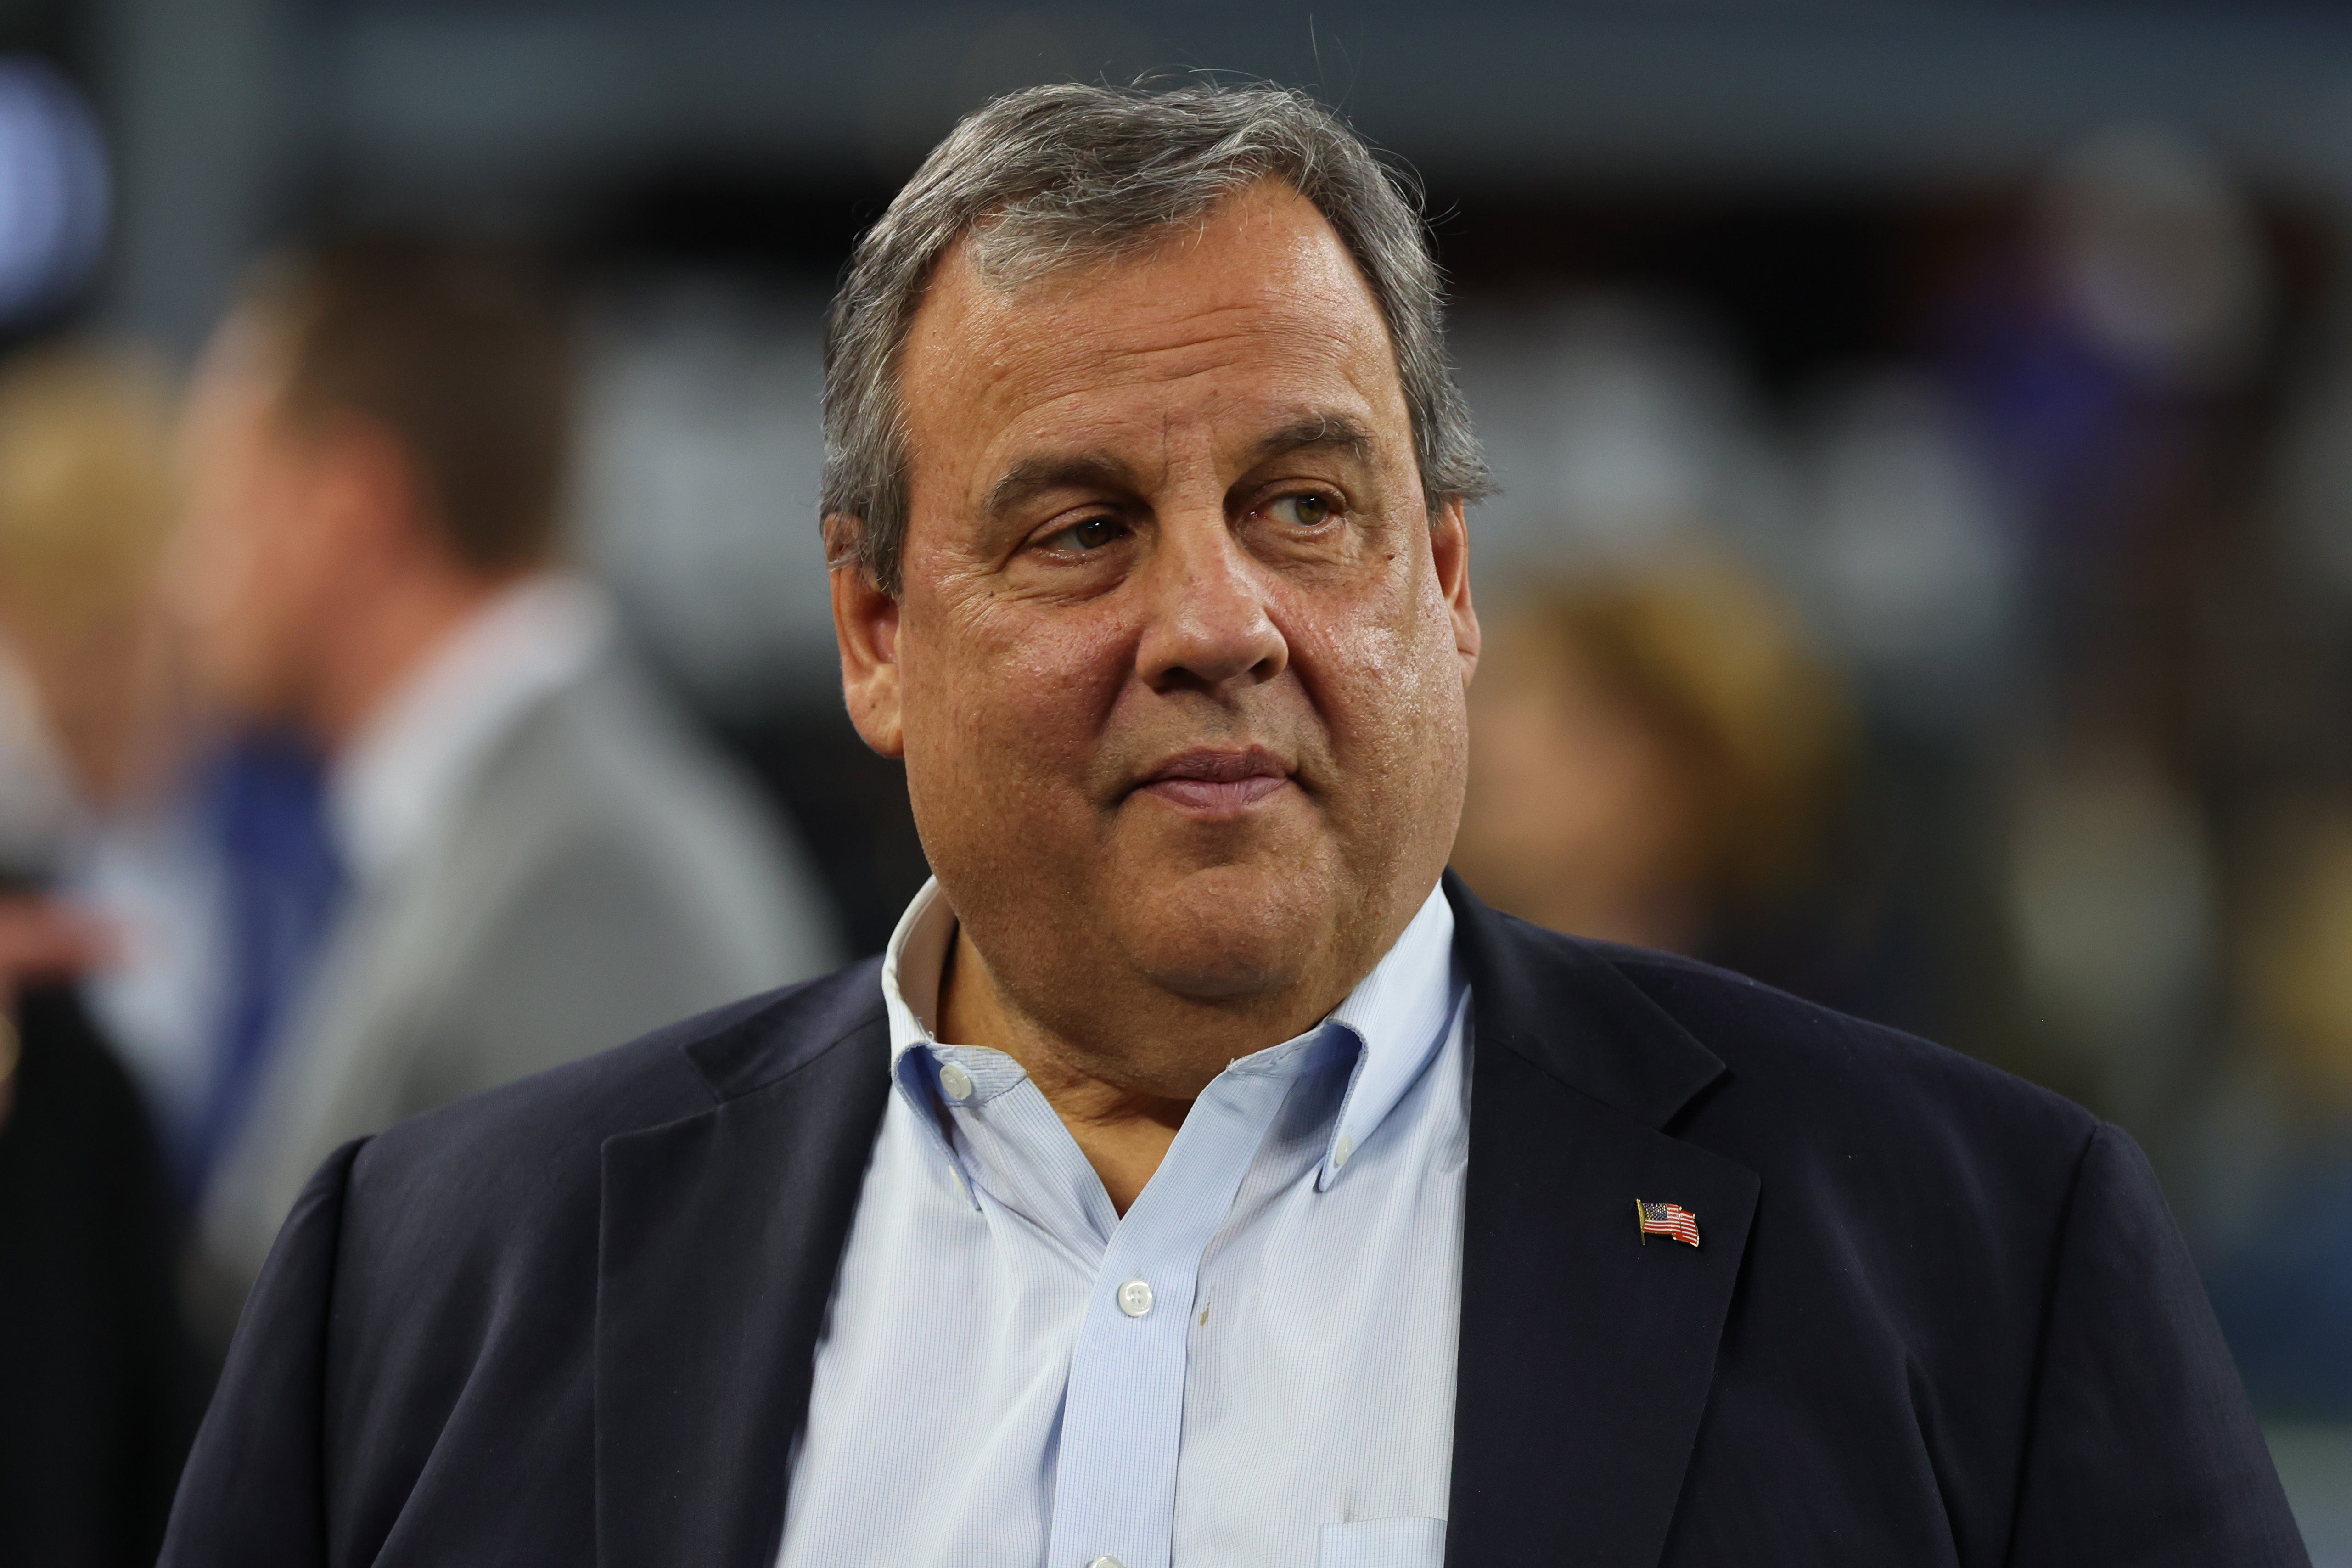 Chris Christie was once a Trump ally